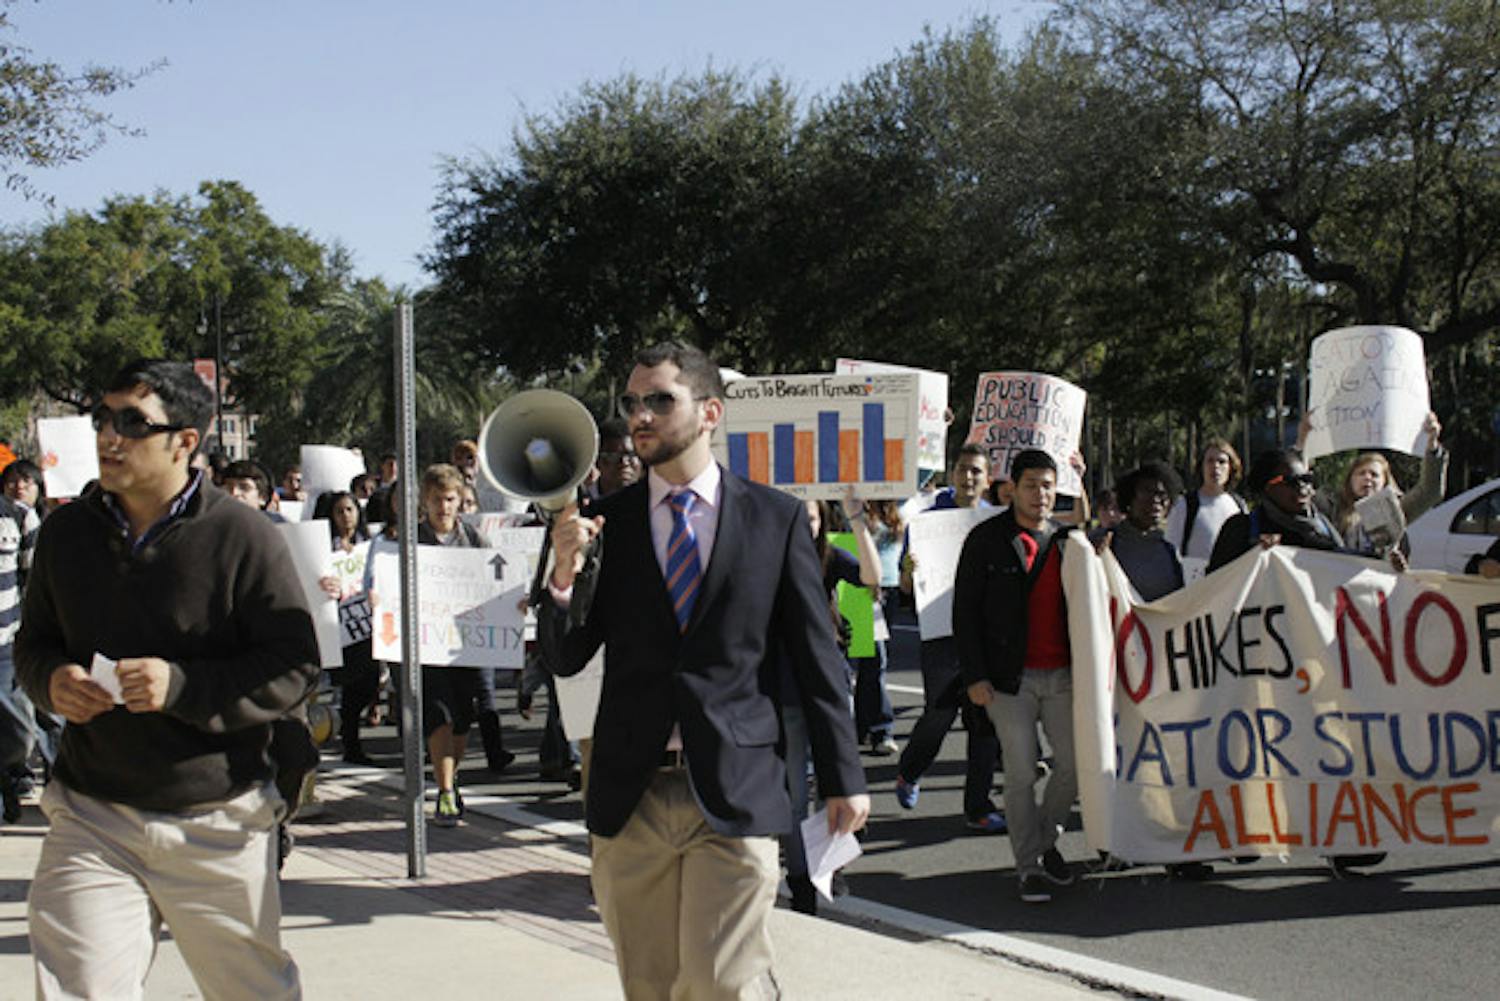 Jose Soto, a fourth-year Ph.D. candidate in food and resource economics, 31, left, and anthropology junior Robbey Hayes, 22, right, lead a group of about 60 protesters to Emerson Alumni Hall, where the UF Board of Trustees met Thursday. They rallied against tuition and fees increases.